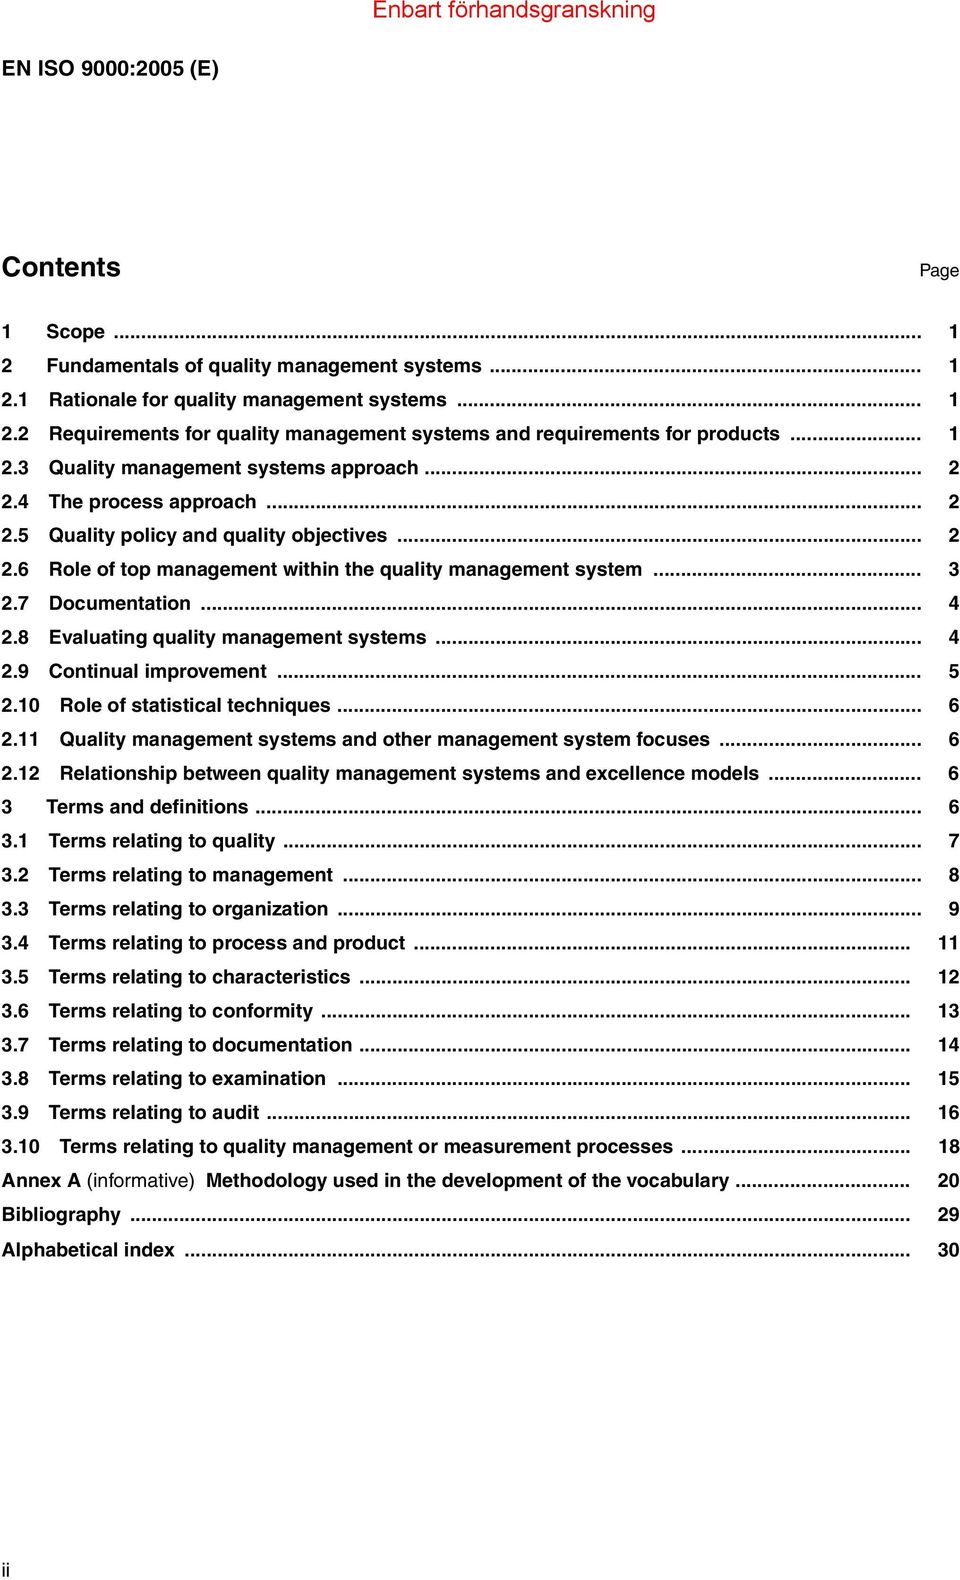 7 Documentation... 4 2.8 Evaluating quality management systems... 4 2.9 Continual improvement... 5 2.10 Role of statistical techniques... 6 2.